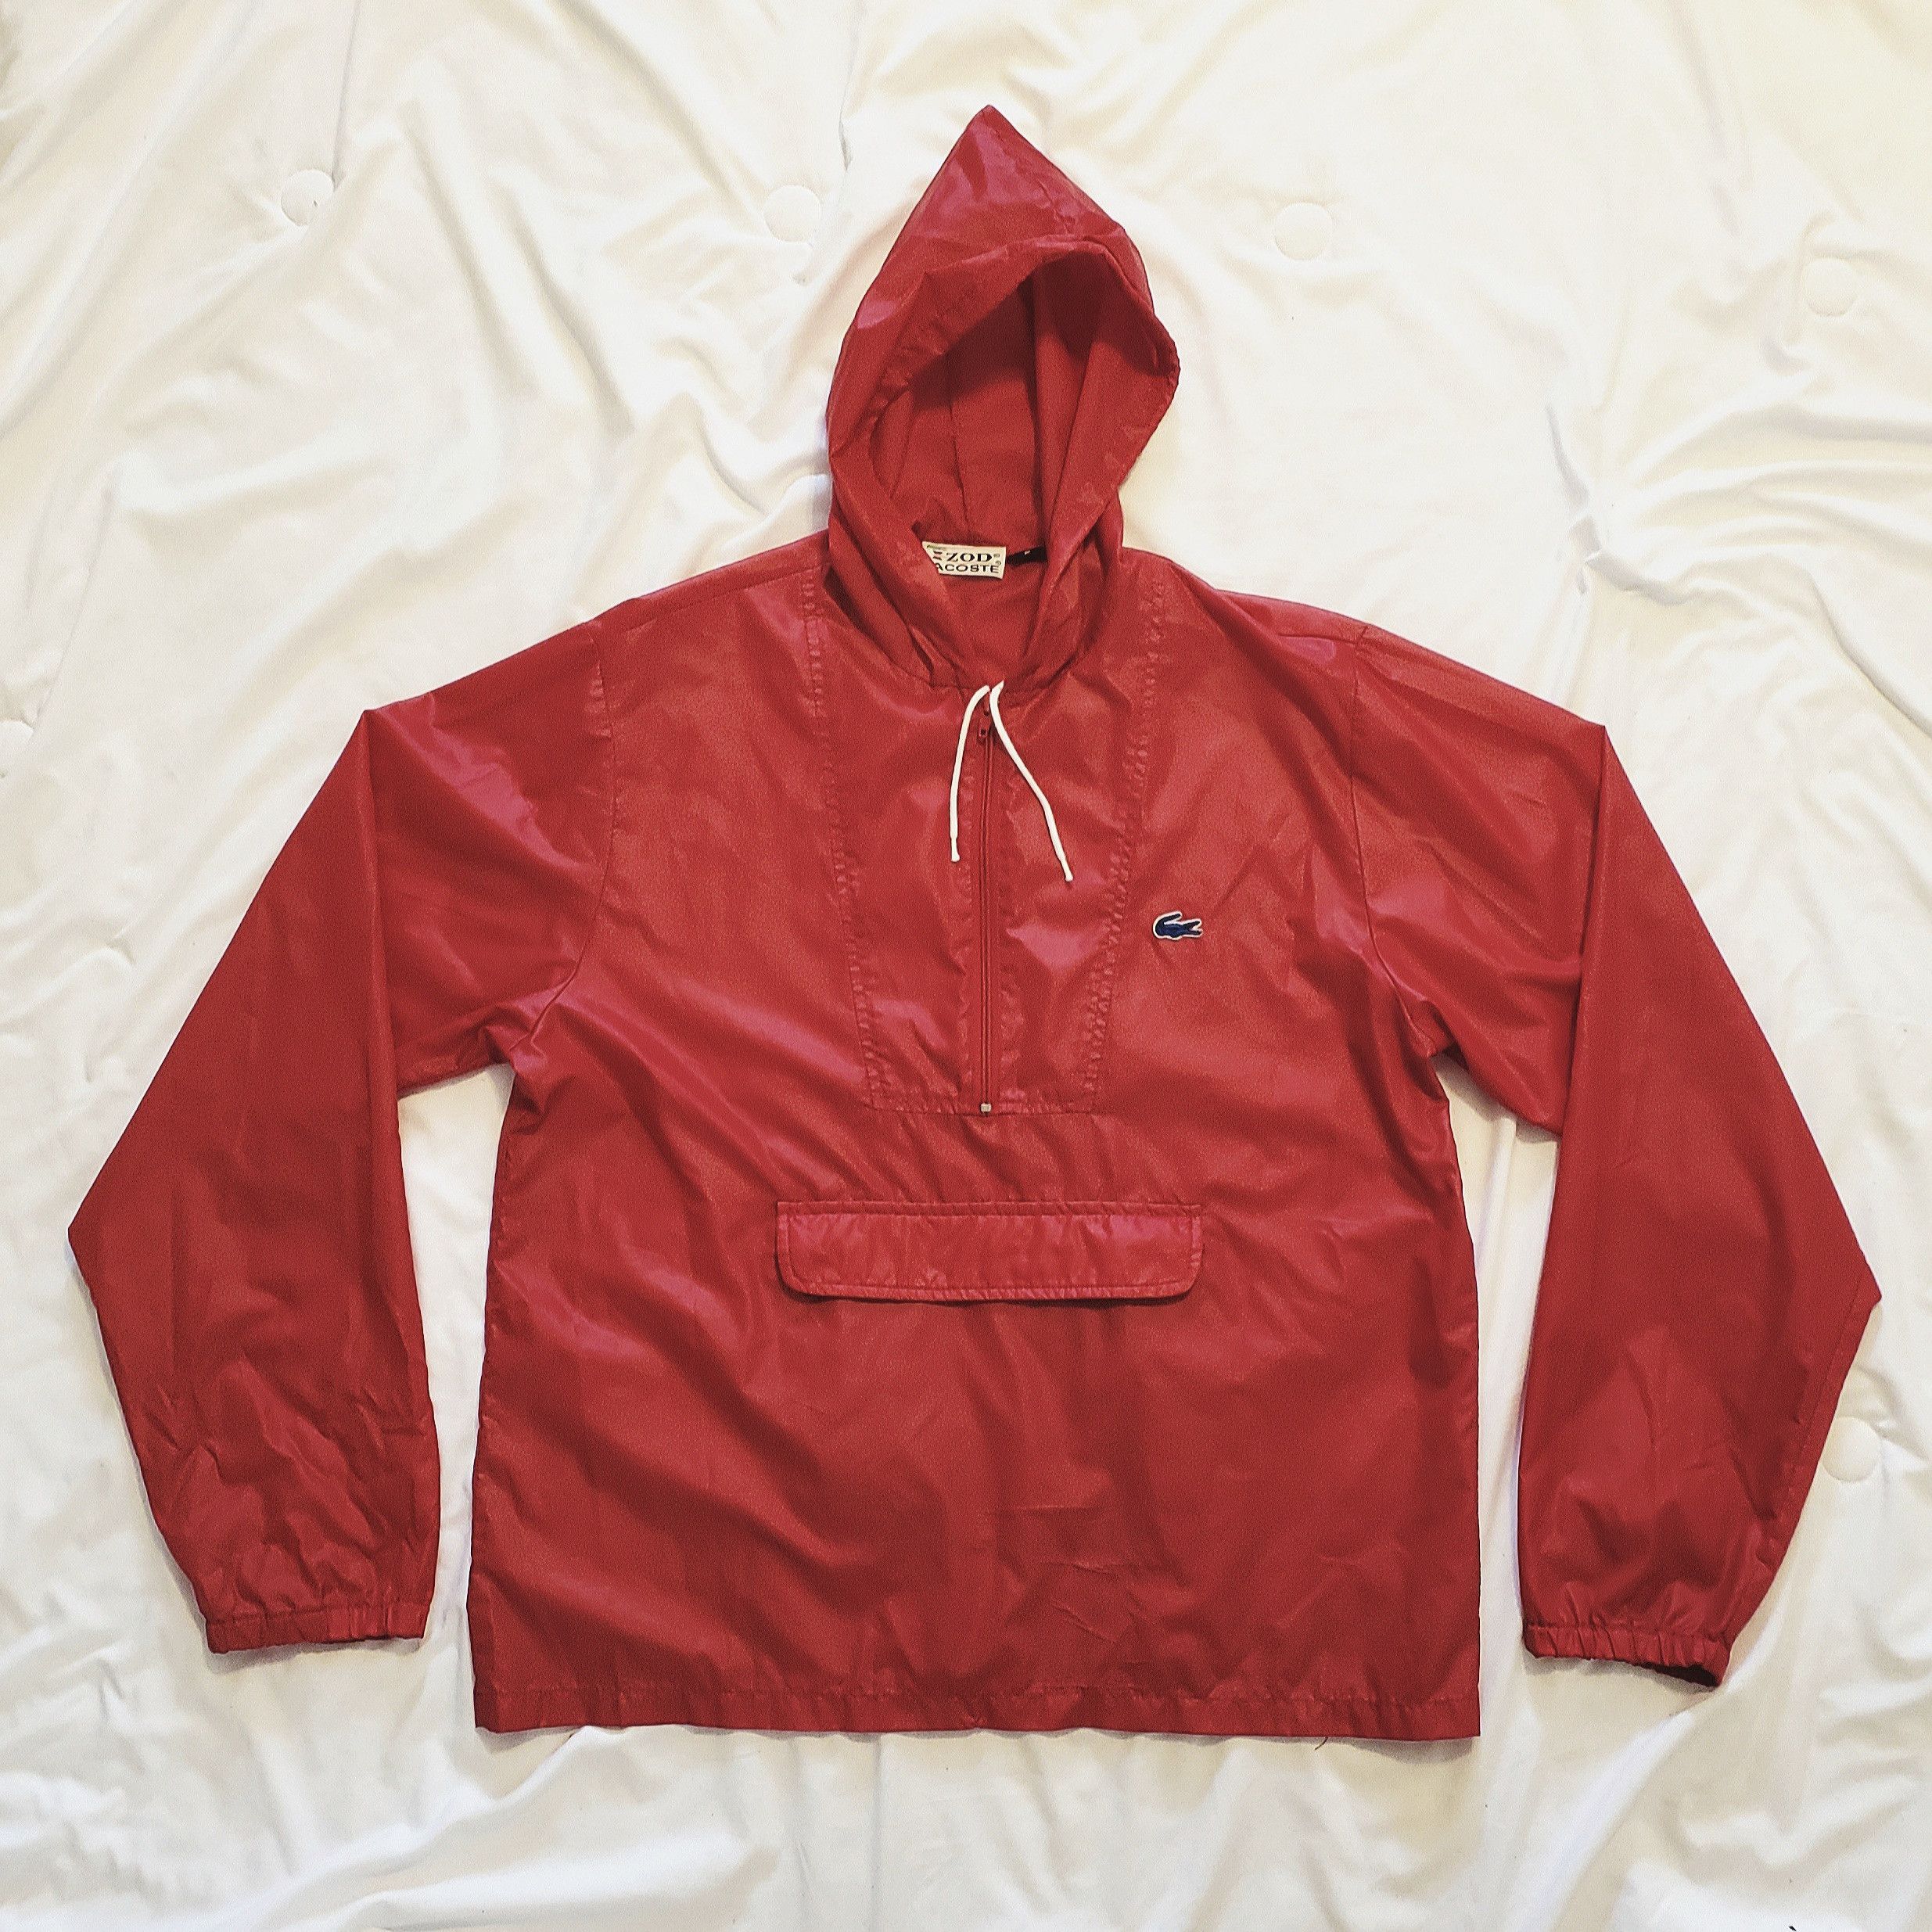 Lacoste Vintage Izod Lacoste Anorak Packable Hooded Rain Poncho | Grailed